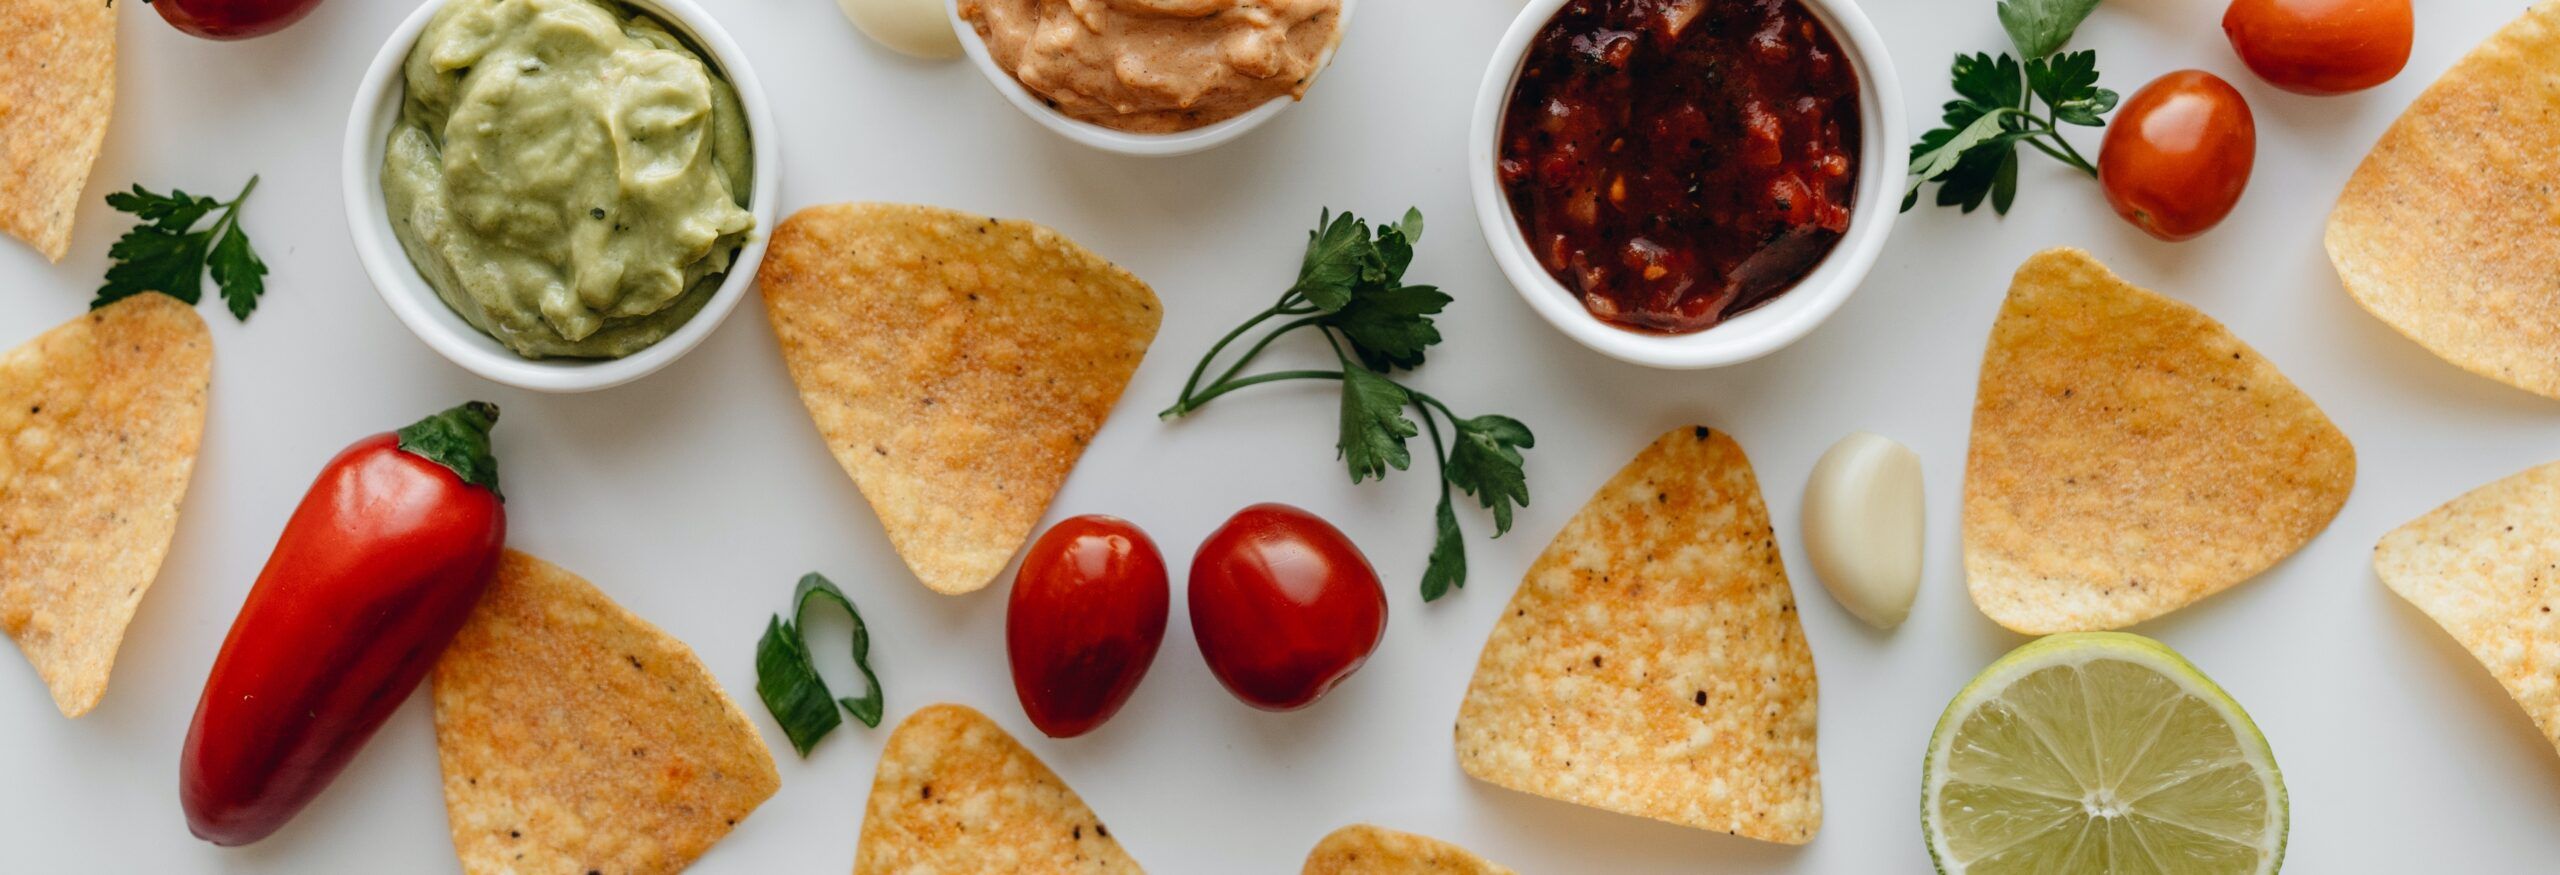 Chips and food for your office party with cinco de mayo office games